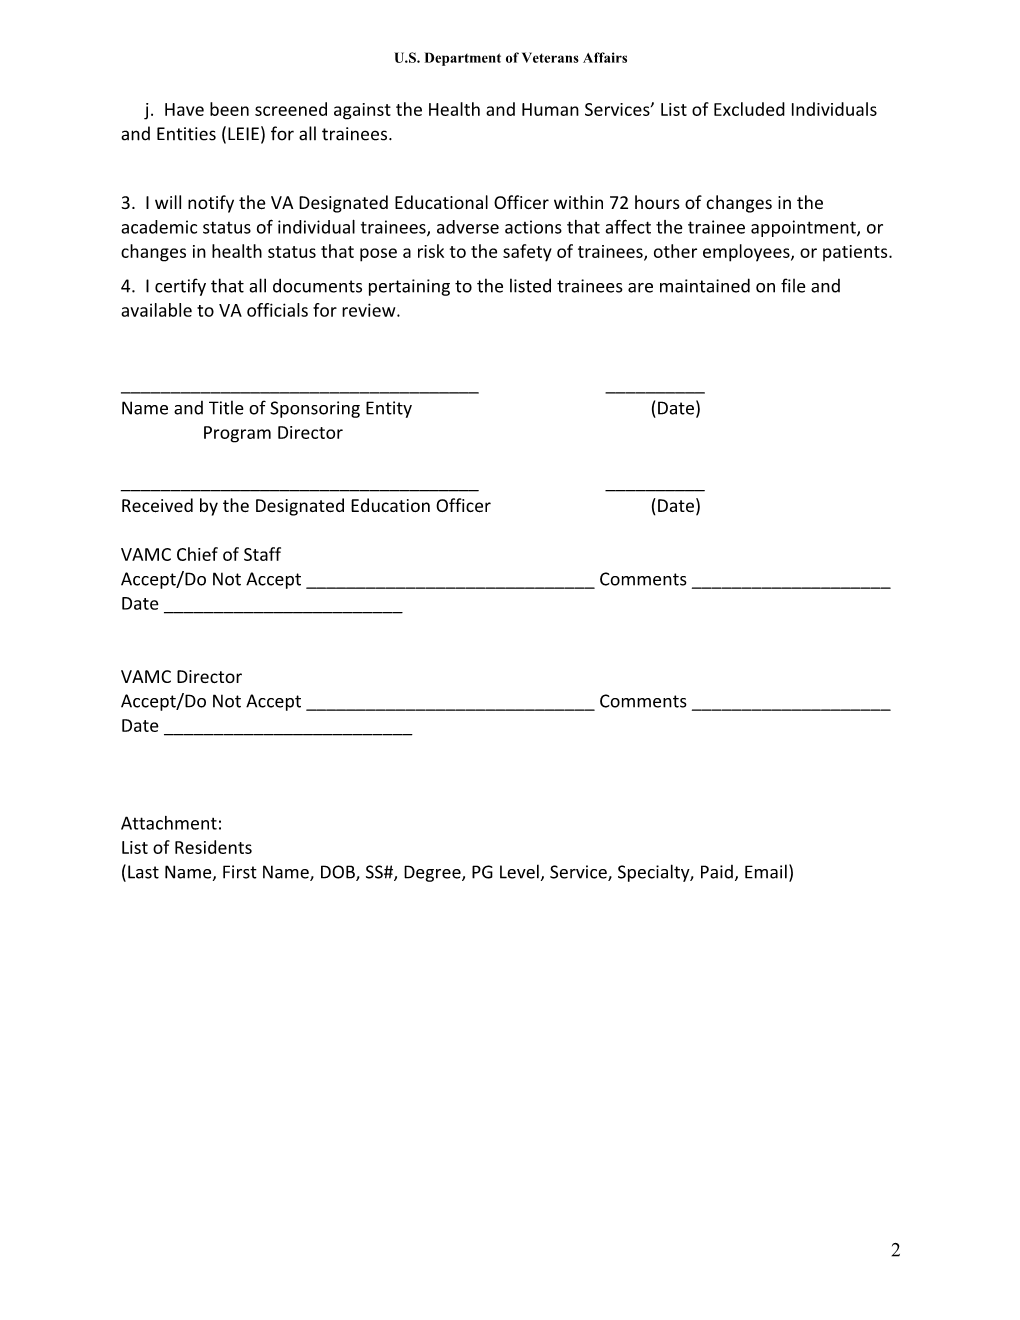 Sample Appointment Letter for Clinical Trainees - U.S. Department of Veterans Affairs